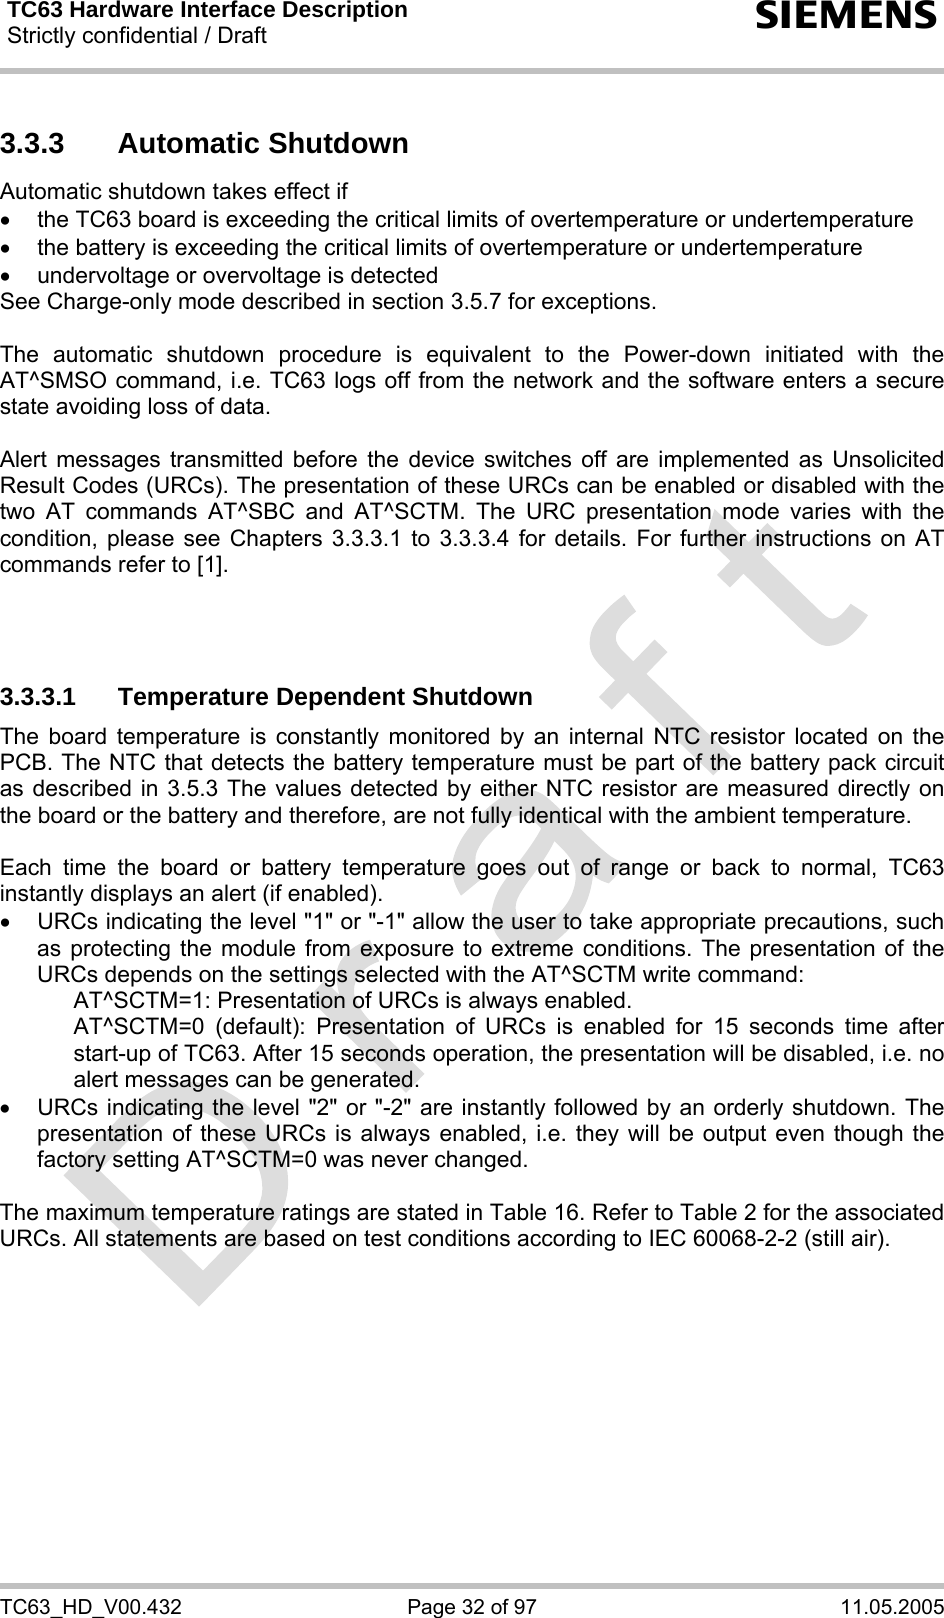 TC63 Hardware Interface Description Strictly confidential / Draft  s TC63_HD_V00.432  Page 32 of 97  11.05.2005 3.3.3 Automatic Shutdown Automatic shutdown takes effect if •  the TC63 board is exceeding the critical limits of overtemperature or undertemperature •  the battery is exceeding the critical limits of overtemperature or undertemperature •  undervoltage or overvoltage is detected See Charge-only mode described in section 3.5.7 for exceptions.   The automatic shutdown procedure is equivalent to the Power-down initiated with the AT^SMSO command, i.e. TC63 logs off from the network and the software enters a secure state avoiding loss of data.   Alert messages transmitted before the device switches off are implemented as Unsolicited Result Codes (URCs). The presentation of these URCs can be enabled or disabled with the two AT commands AT^SBC and AT^SCTM. The URC presentation mode varies with the condition, please see Chapters 3.3.3.1 to 3.3.3.4 for details. For further instructions on AT commands refer to [1].    3.3.3.1  Temperature Dependent Shutdown The board temperature is constantly monitored by an internal NTC resistor located on the PCB. The NTC that detects the battery temperature must be part of the battery pack circuit as described in 3.5.3 The values detected by either NTC resistor are measured directly on the board or the battery and therefore, are not fully identical with the ambient temperature.   Each time the board or battery temperature goes out of range or back to normal, TC63 instantly displays an alert (if enabled). •  URCs indicating the level &quot;1&quot; or &quot;-1&quot; allow the user to take appropriate precautions, such as protecting the module from exposure to extreme conditions. The presentation of the URCs depends on the settings selected with the AT^SCTM write command:     AT^SCTM=1: Presentation of URCs is always enabled.      AT^SCTM=0 (default): Presentation of URCs is enabled for 15 seconds time after start-up of TC63. After 15 seconds operation, the presentation will be disabled, i.e. no alert messages can be generated.  •  URCs indicating the level &quot;2&quot; or &quot;-2&quot; are instantly followed by an orderly shutdown. The presentation of these URCs is always enabled, i.e. they will be output even though the factory setting AT^SCTM=0 was never changed.  The maximum temperature ratings are stated in Table 16. Refer to Table 2 for the associated URCs. All statements are based on test conditions according to IEC 60068-2-2 (still air).  